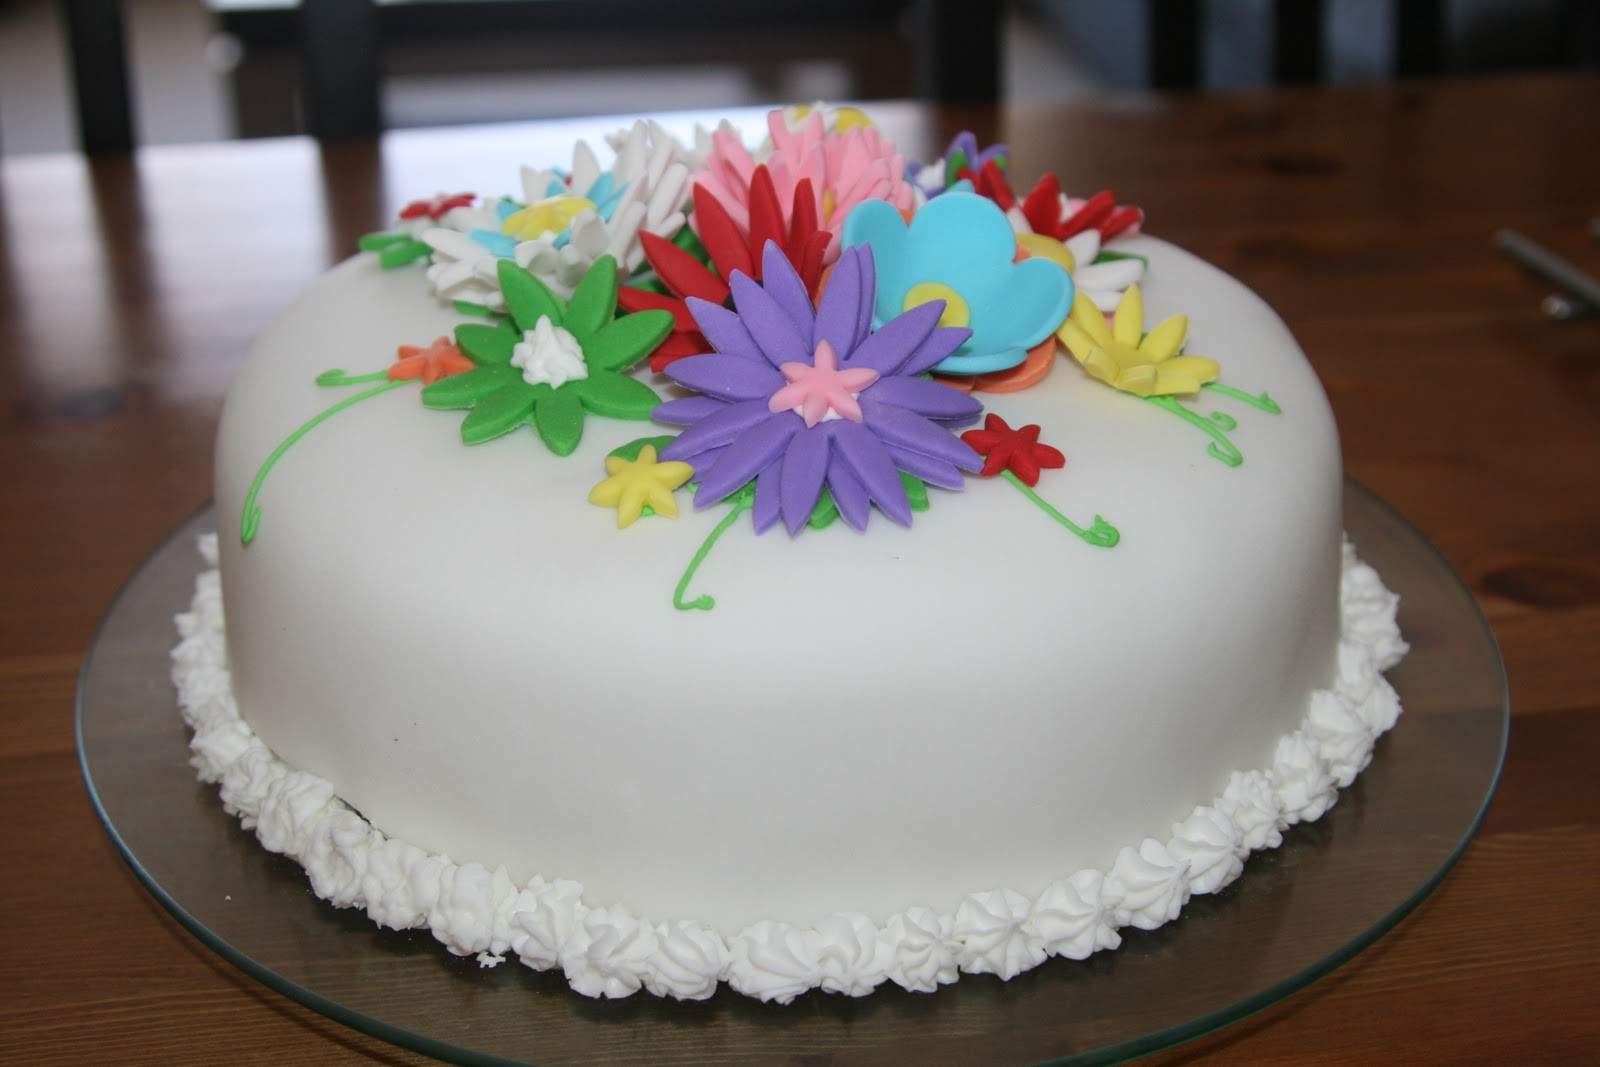 Best Flower Birthday Cake from For the Fun of Cooking Flower Birthday Cake....